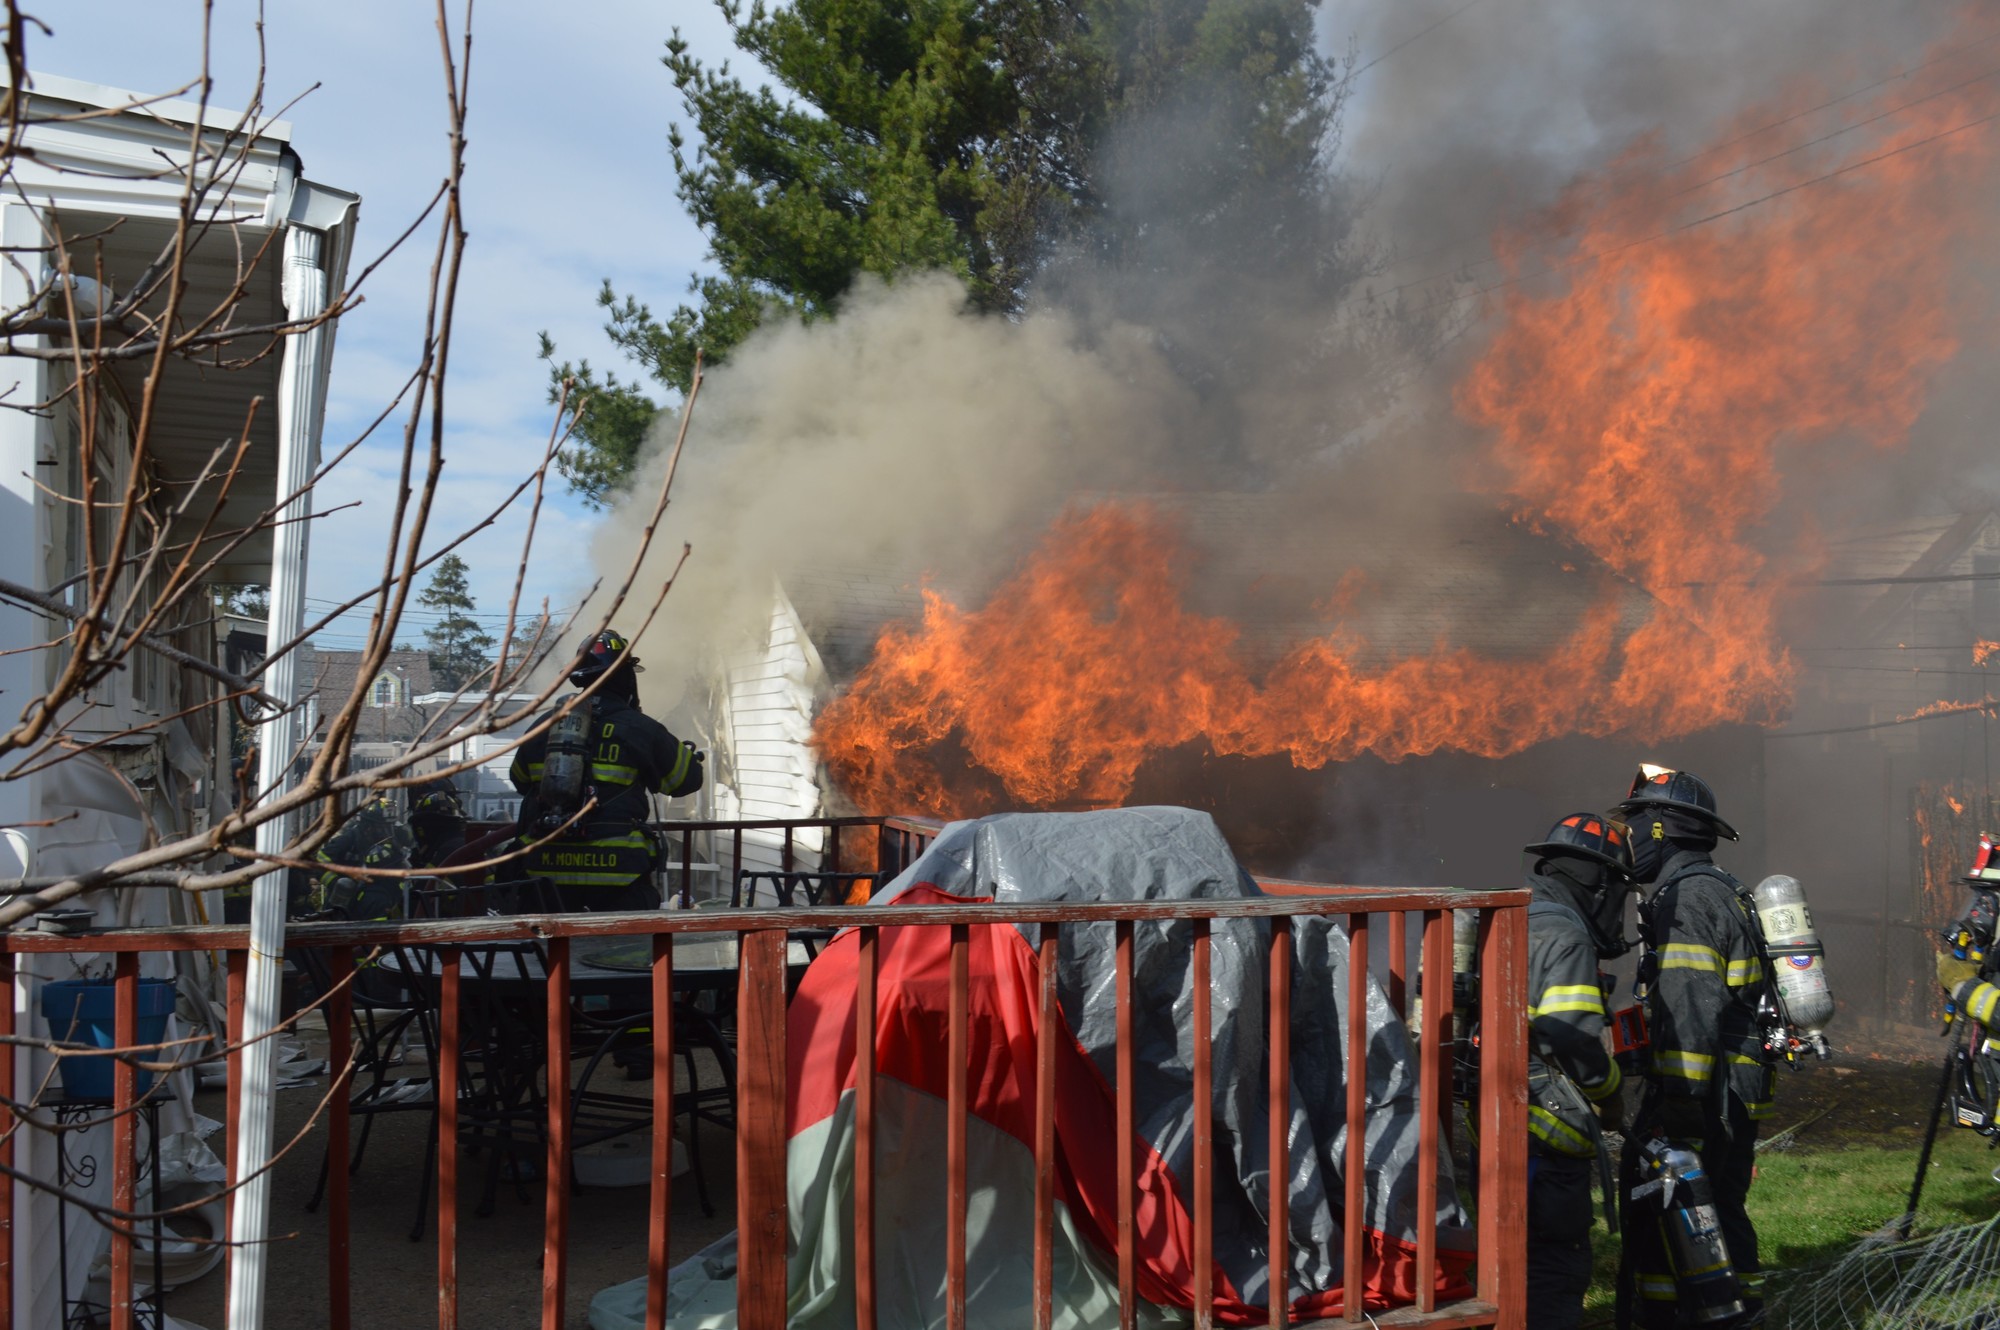 East Meadow Fire Department volunteers extinguished a fire that decimated a garage and shed in a Bright Avenue backyard on Wednesday, shortly before 5 p.m.   Photo courtesy of John O Brien Sr.